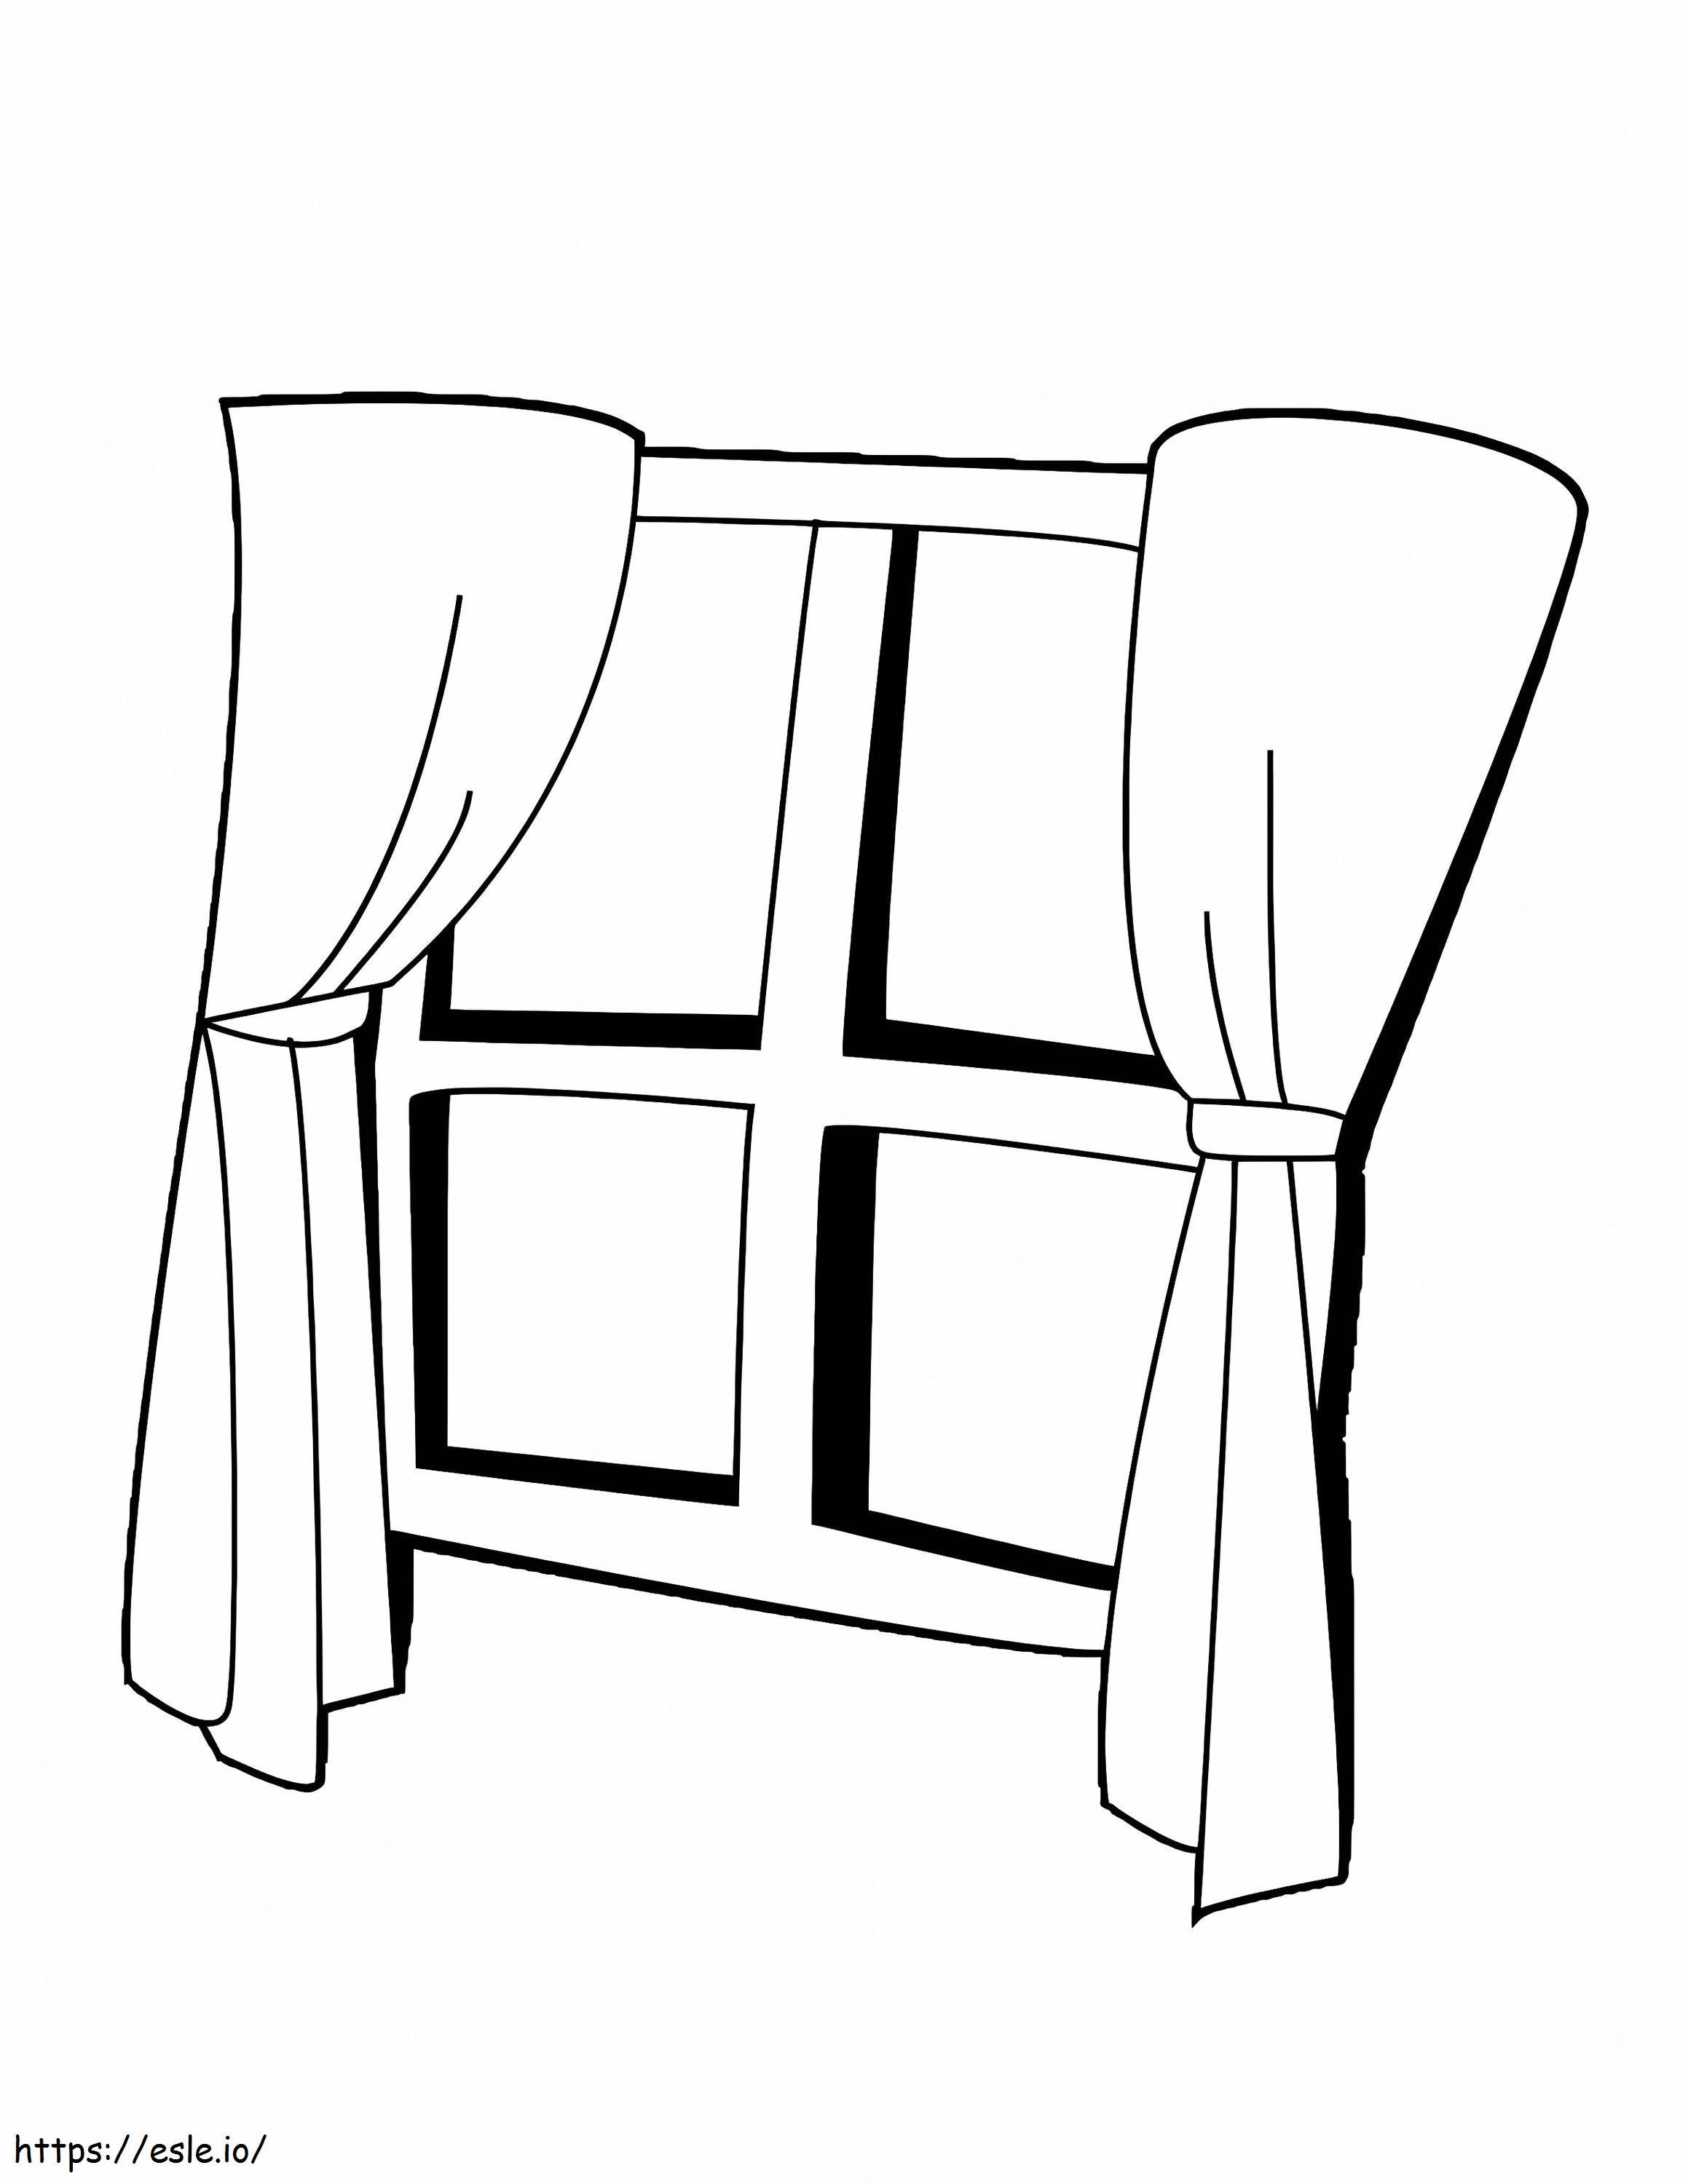 Free Printable Window coloring page